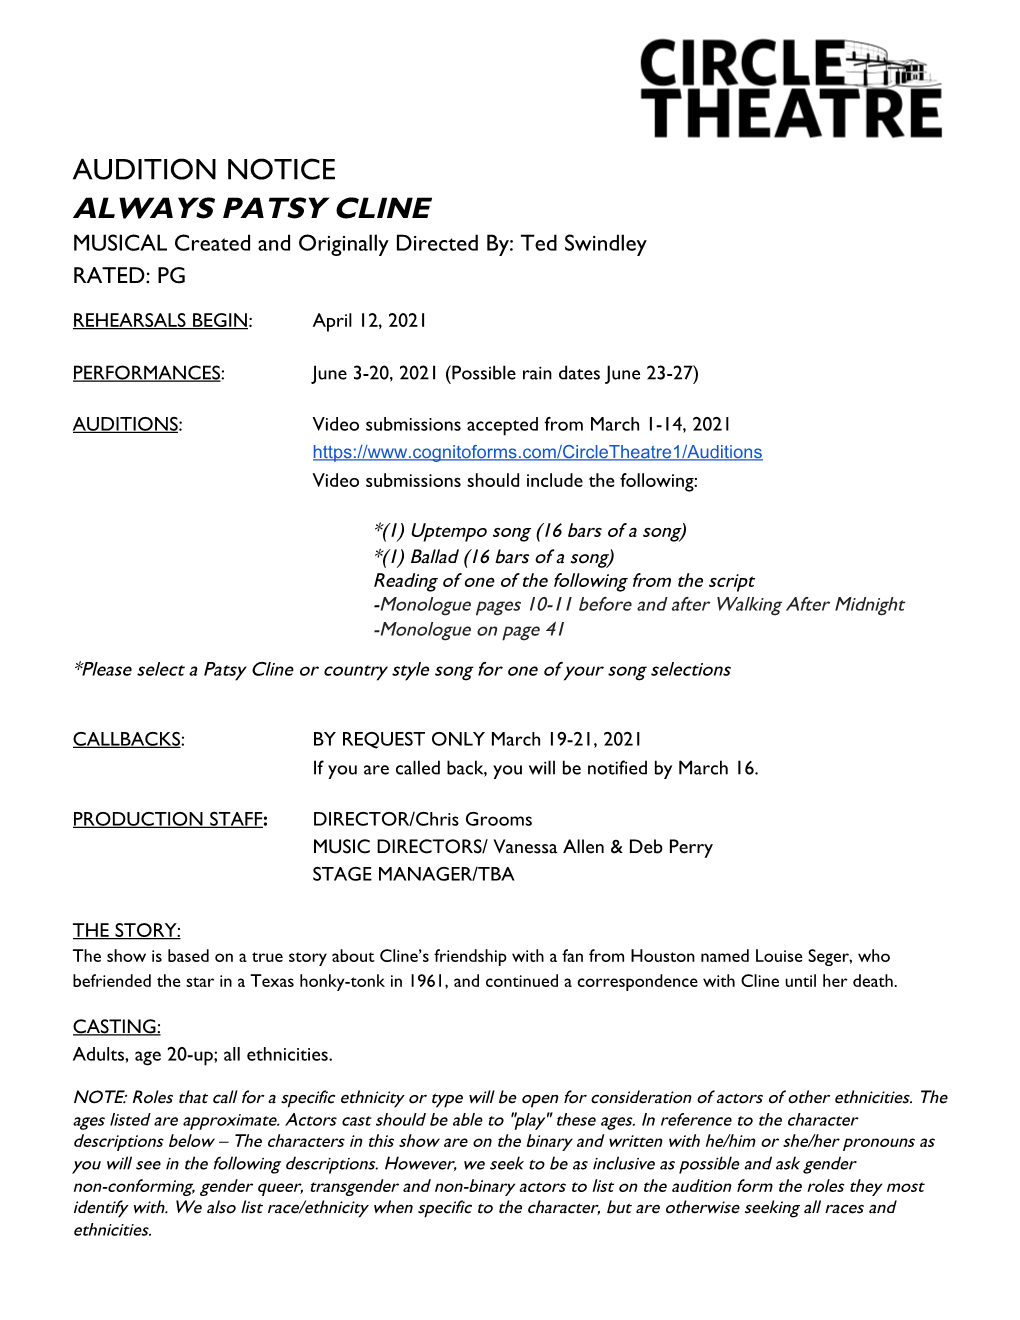 AUDITION NOTICE ALWAYS PATSY CLINE MUSICAL Created and Originally Directed By: Ted Swindley RATED: PG